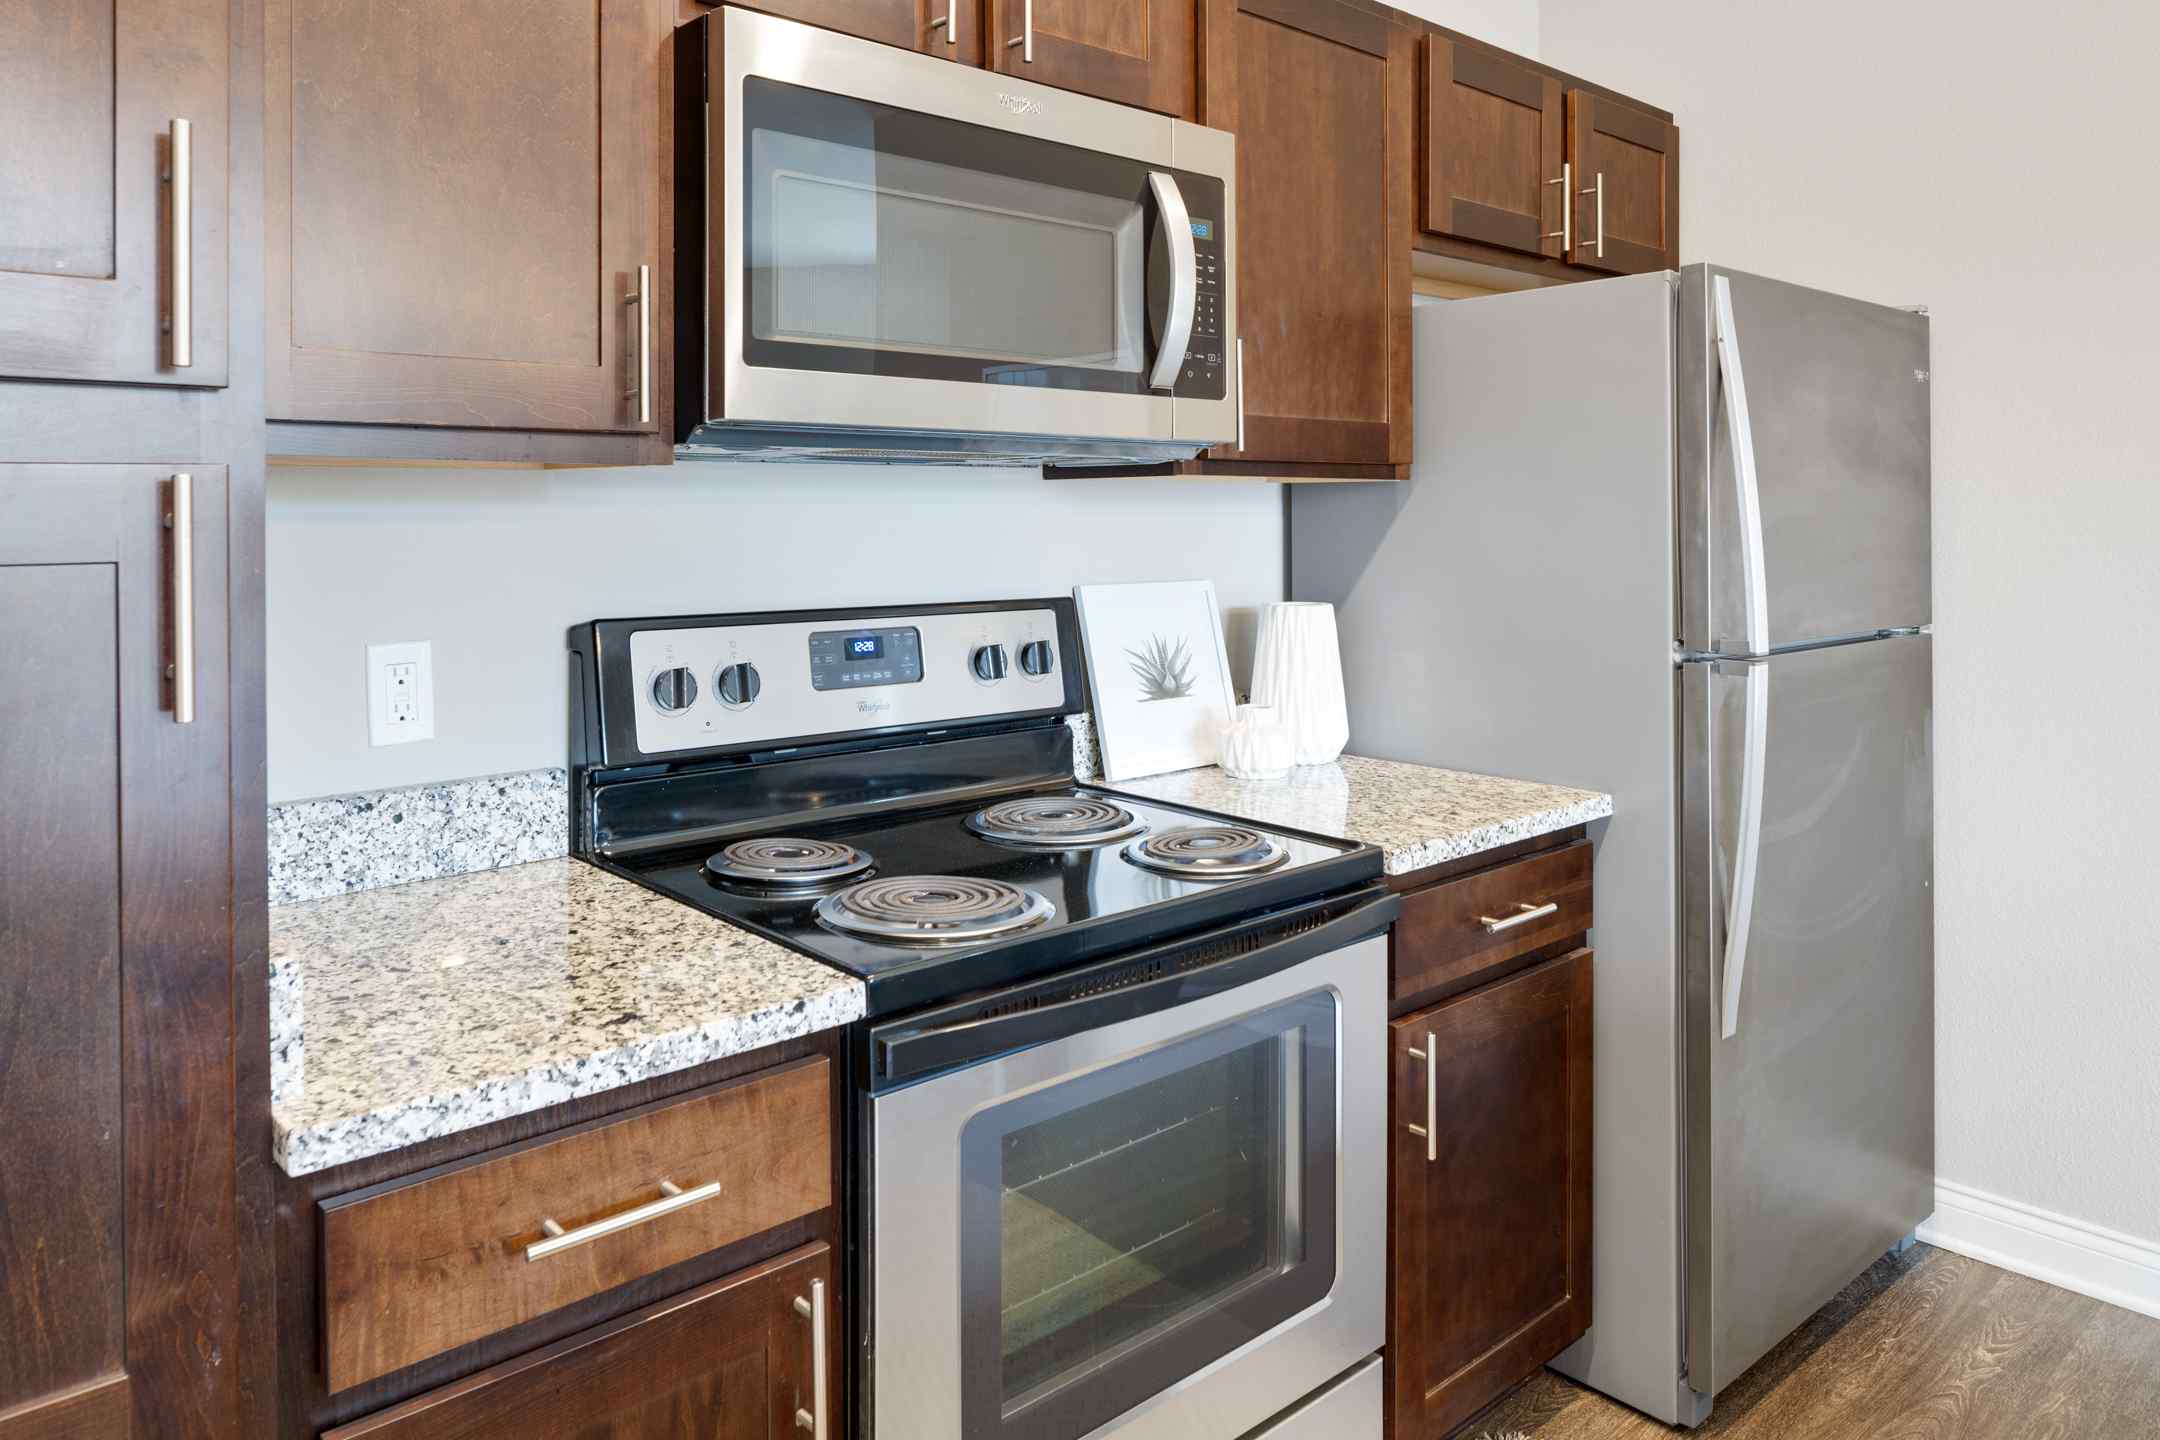 Newly renovated apartment kitchen equipped with modern appliances, including an oven, microwave, and refrigerator.